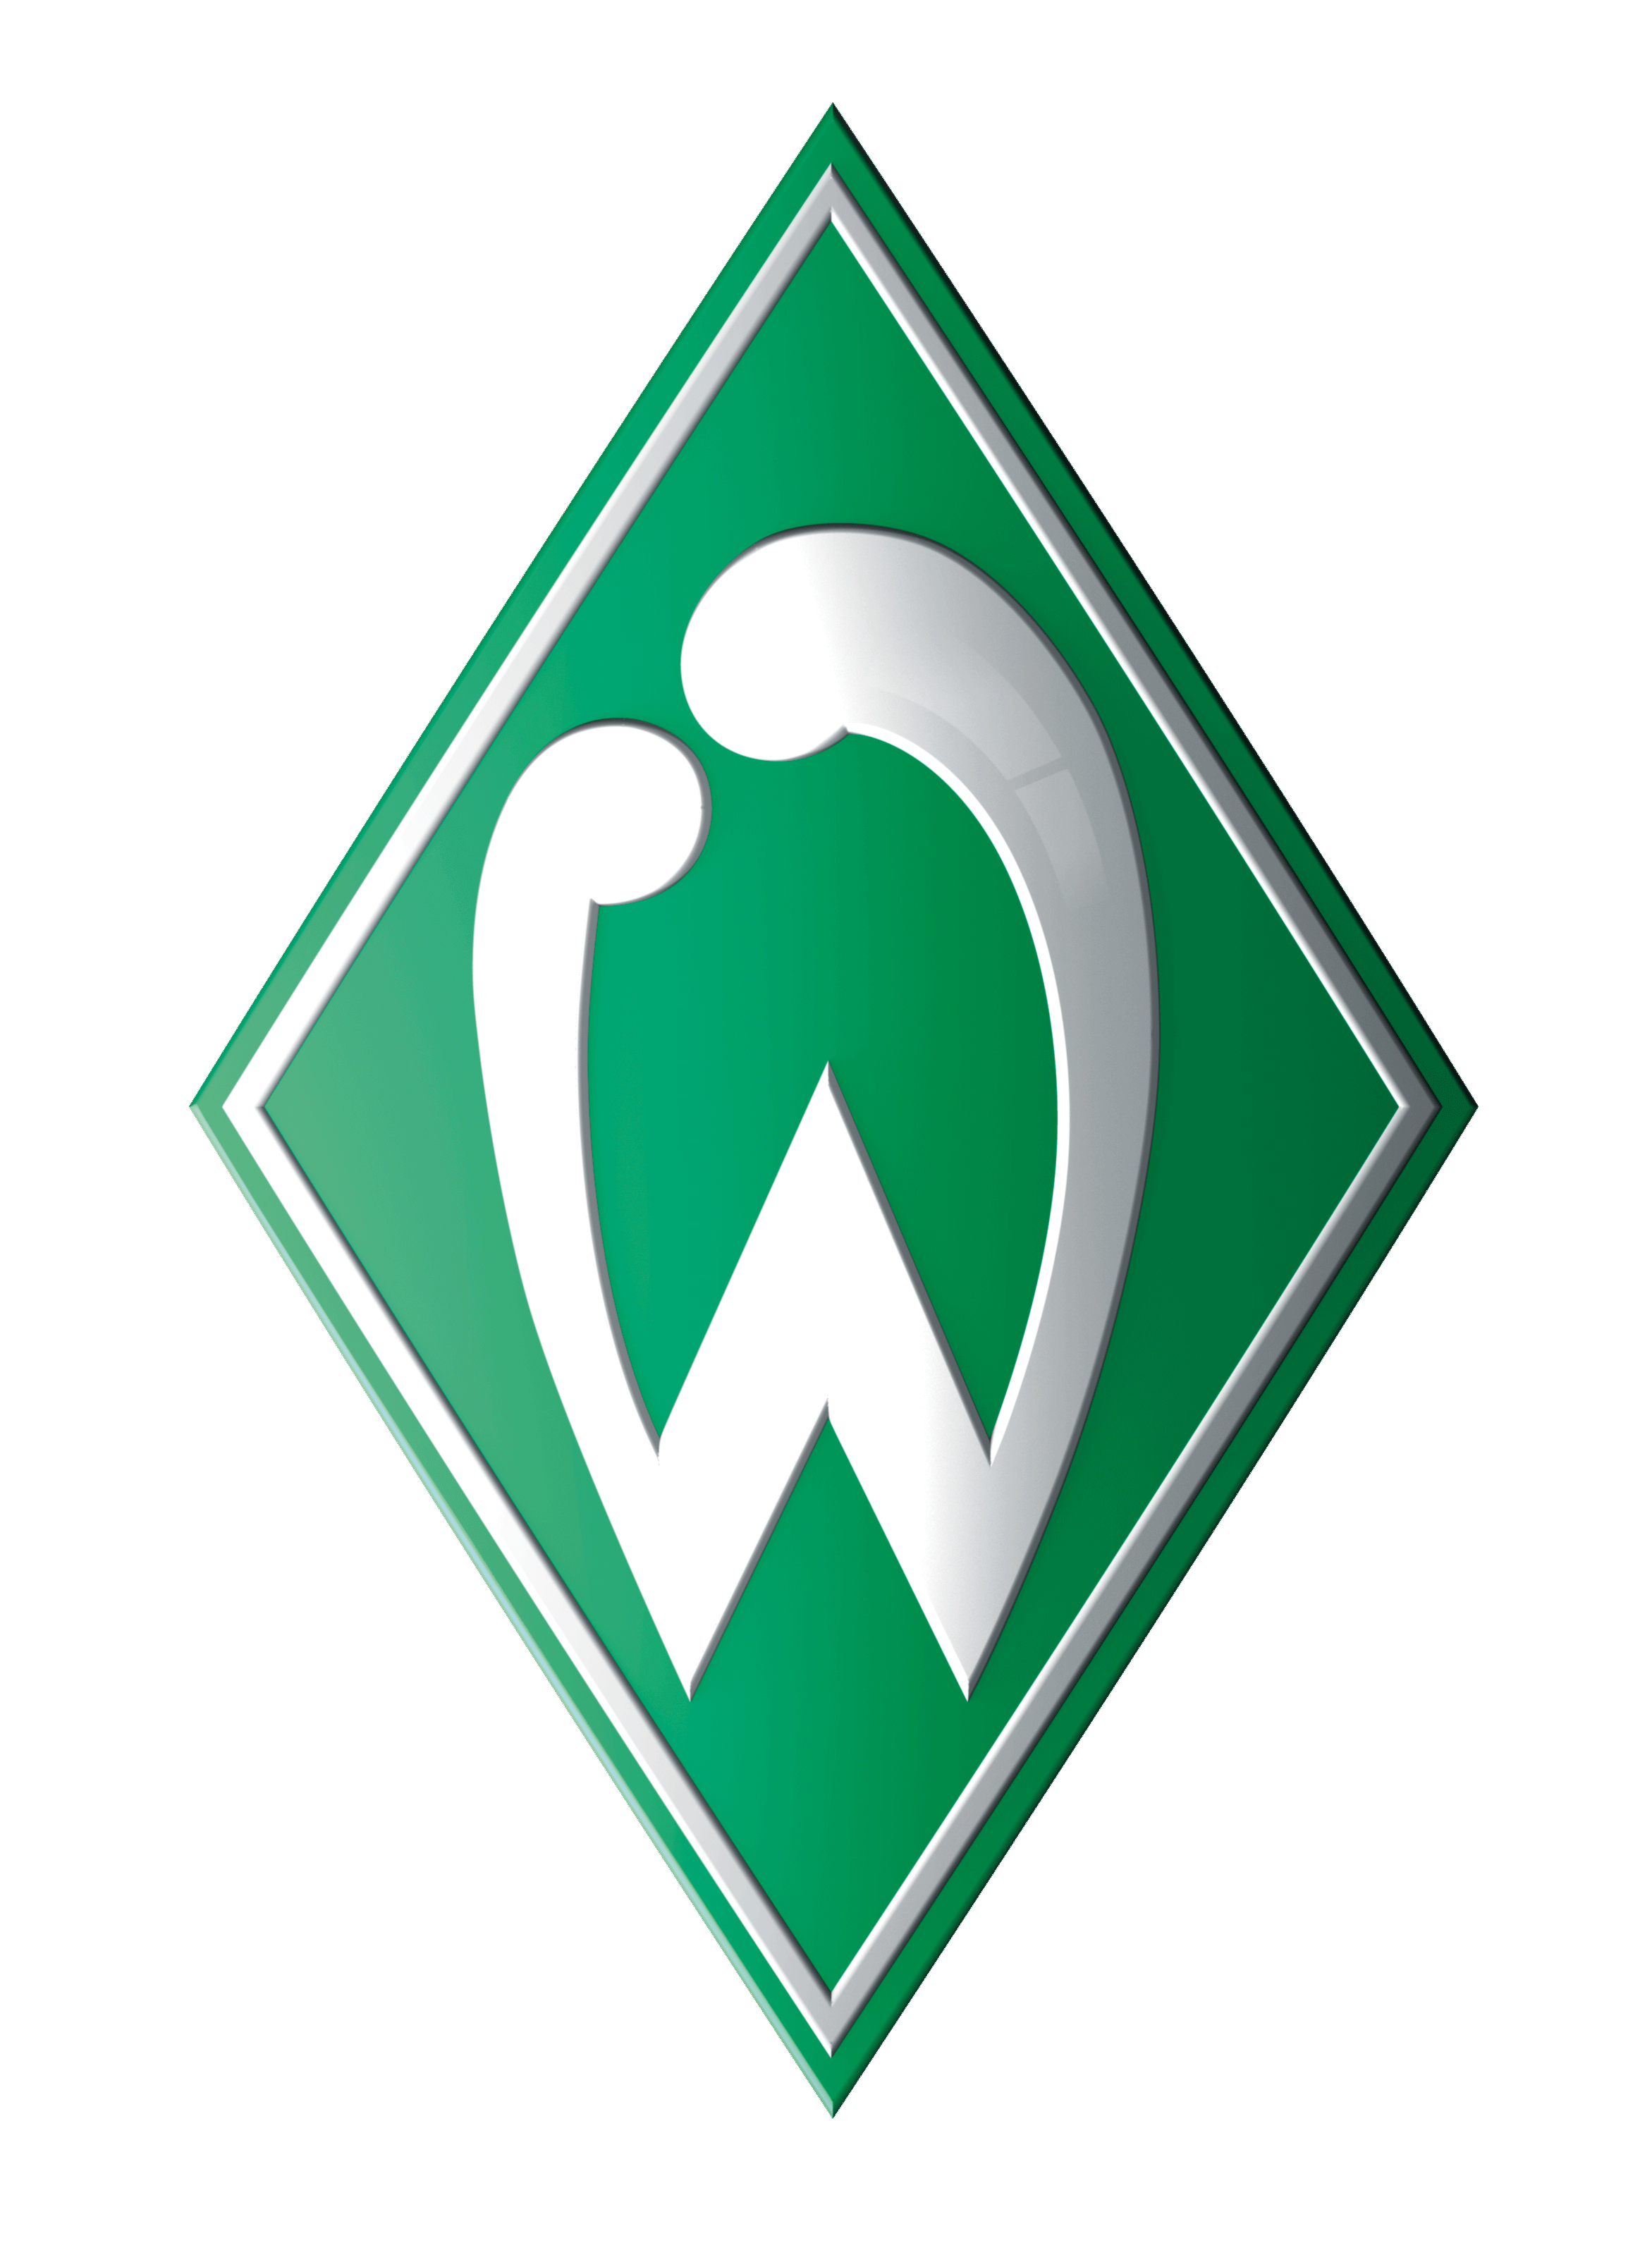 Logo of SV Werder Bremen - a green diamond with white framing and the capital letter W in the middle